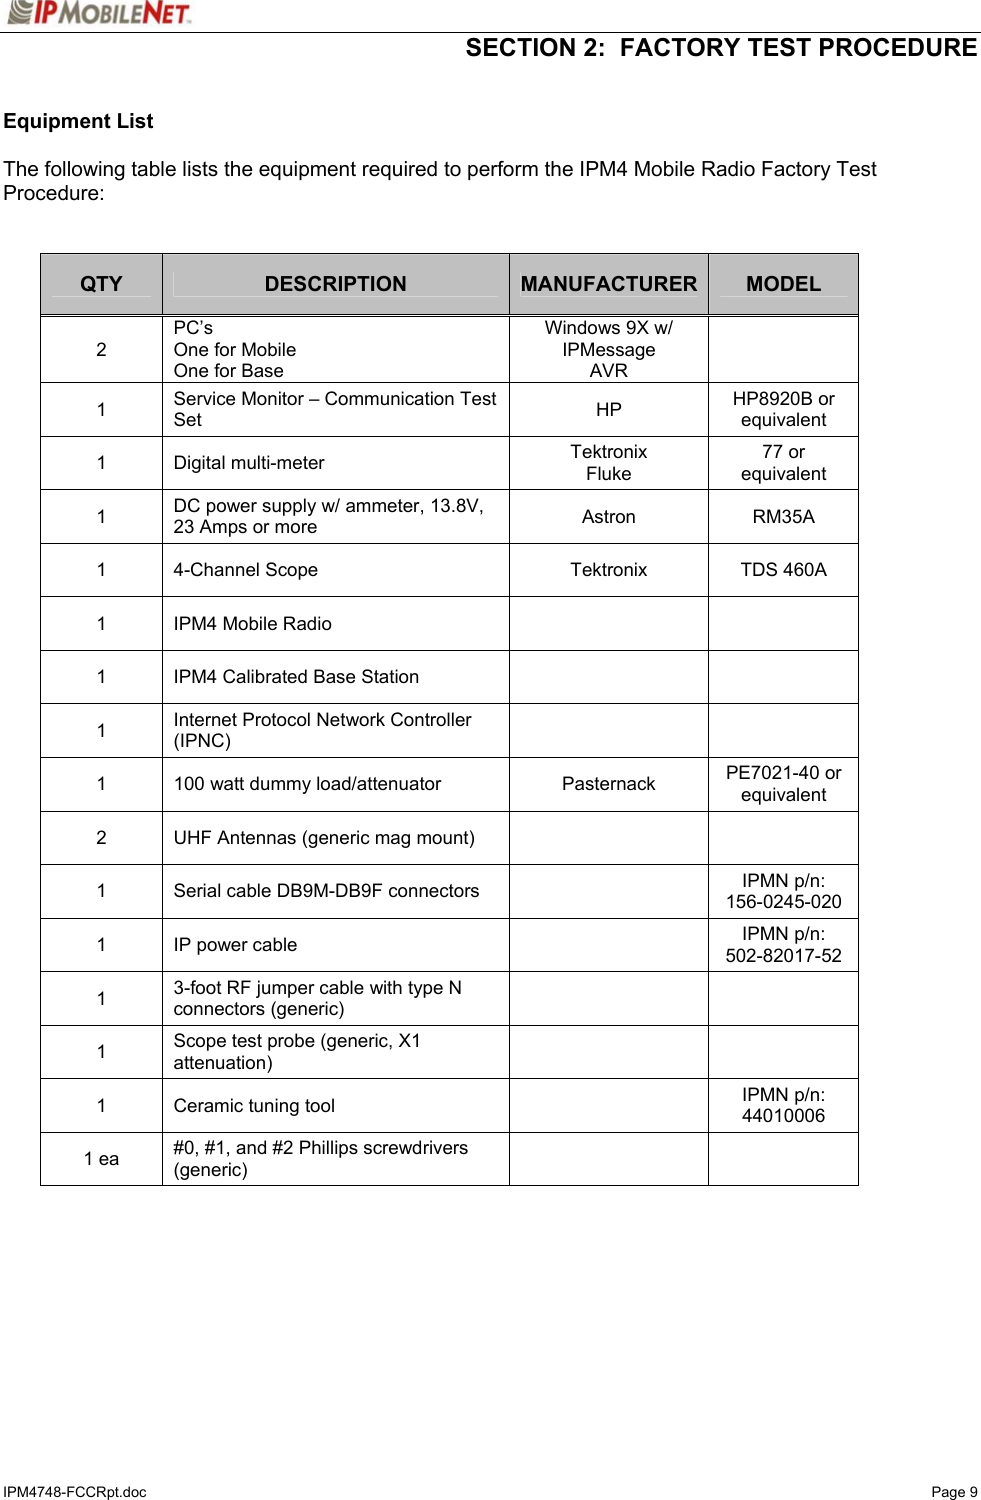   SECTION 2:  FACTORY TEST PROCEDURE  IPM4748-FCCRpt.doc   Page 9  Equipment List   The following table lists the equipment required to perform the IPM4 Mobile Radio Factory Test Procedure:   QTY  DESCRIPTION  MANUFACTURER MODEL 2 PC’s One for Mobile One for Base Windows 9X w/ IPMessage AVR  1  Service Monitor – Communication Test Set  HP  HP8920B or equivalent 1 Digital multi-meter  Tektronix Fluke 77 or equivalent 1  DC power supply w/ ammeter, 13.8V, 23 Amps or more  Astron  RM35A   1  4-Channel Scope  Tektronix  TDS 460A 1  IPM4 Mobile Radio     1  IPM4 Calibrated Base Station     1  Internet Protocol Network Controller (IPNC)    1  100 watt dummy load/attenuator  Pasternack  PE7021-40 or equivalent 2  UHF Antennas (generic mag mount)     1  Serial cable DB9M-DB9F connectors    IPMN p/n:  156-0245-020 1  IP power cable    IPMN p/n: 502-82017-52 1  3-foot RF jumper cable with type N connectors (generic)    1  Scope test probe (generic, X1 attenuation)    1  Ceramic tuning tool    IPMN p/n: 44010006 1 ea  #0, #1, and #2 Phillips screwdrivers (generic)       